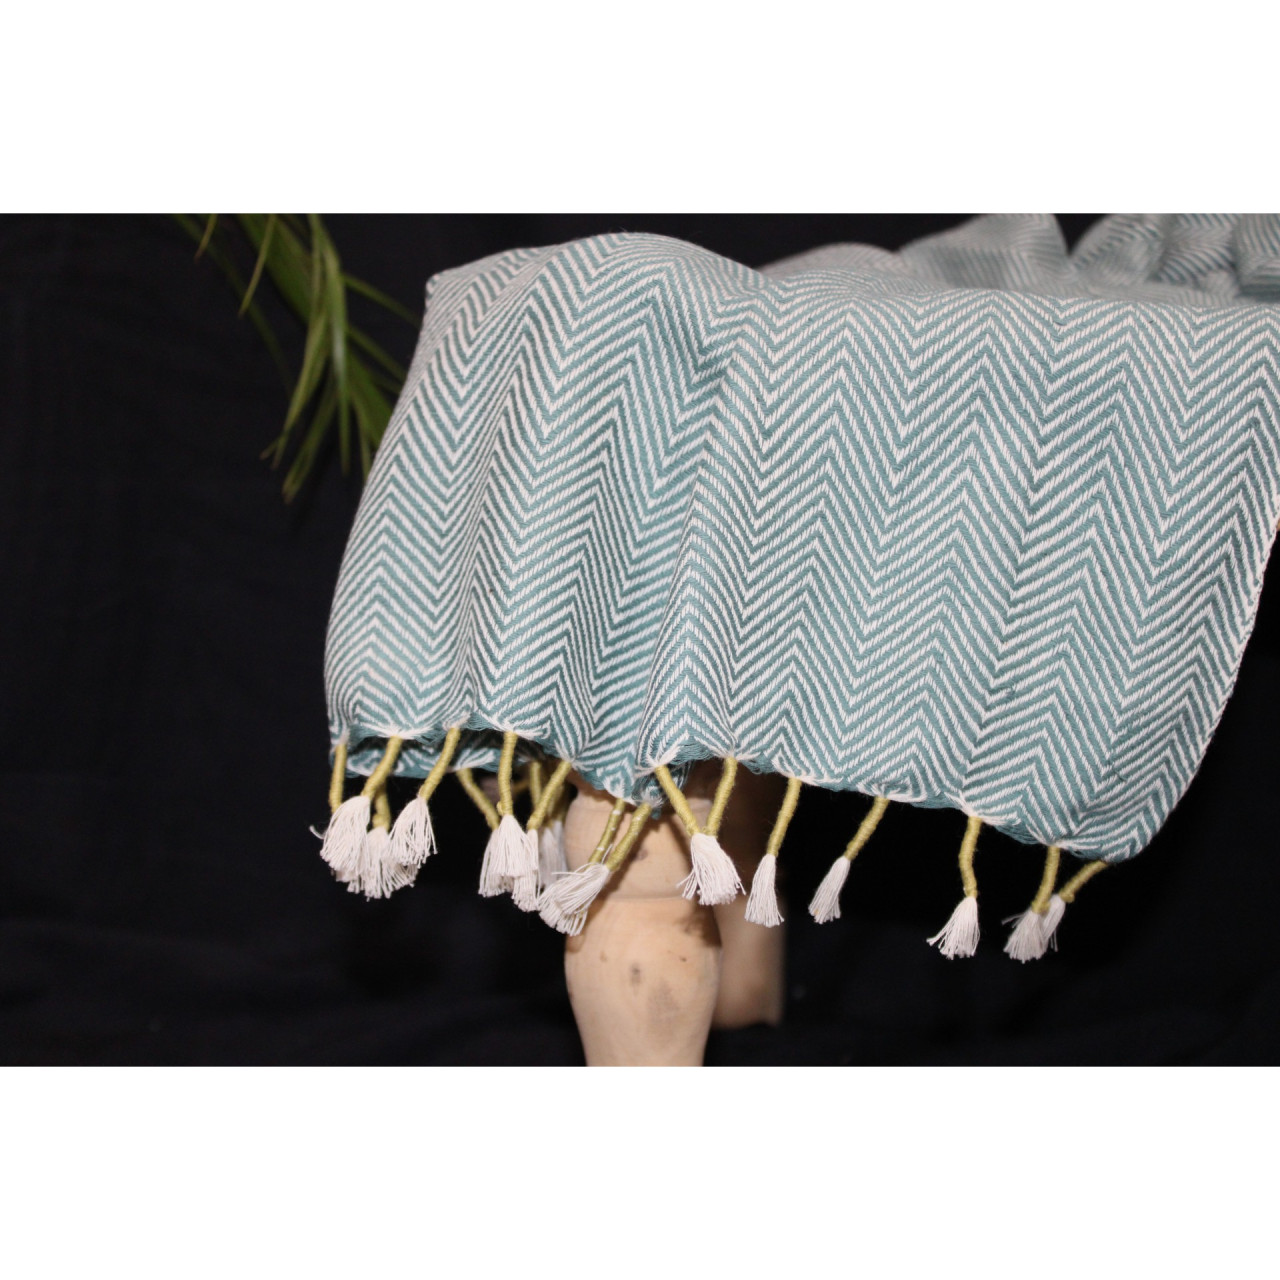 (1440) Cotton and khadi  Azo-free dyed throw from Bihar - Green, piped fringes, textured, white